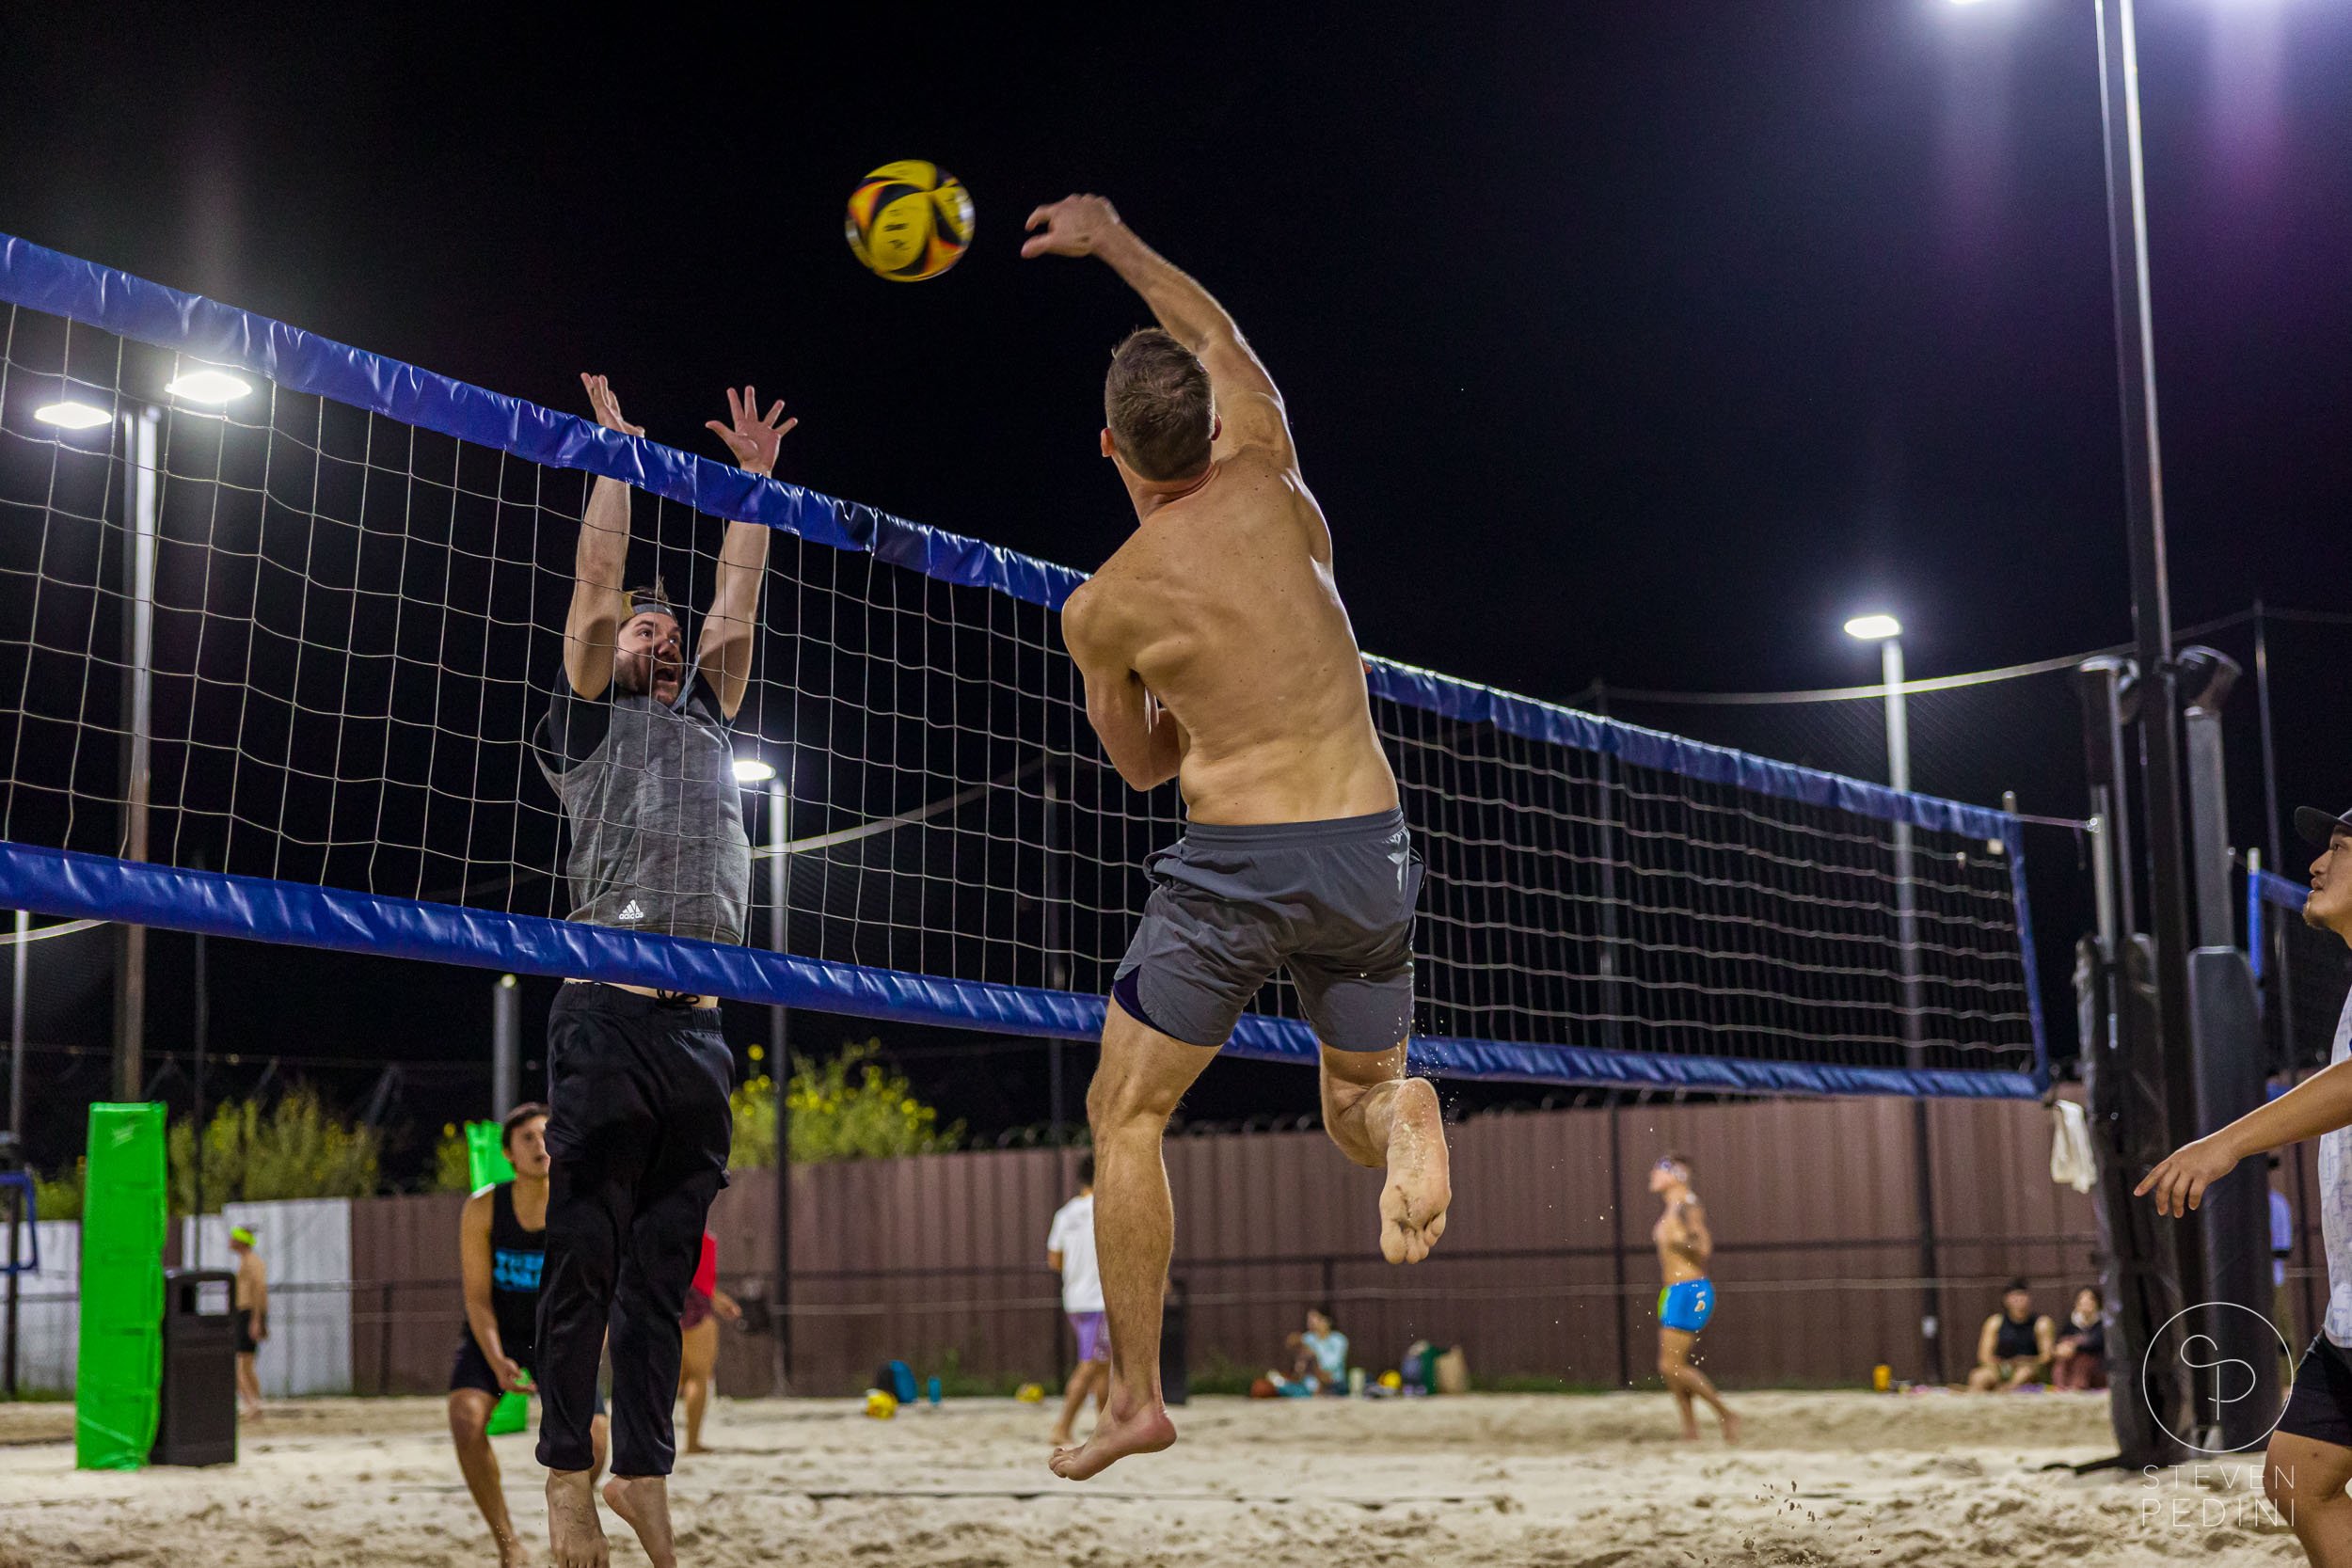 Steven Pedini Photography - Bumpy Pickle - Sand Volleyball - Houston TX - World Cup of Volleyball - 00399.jpg